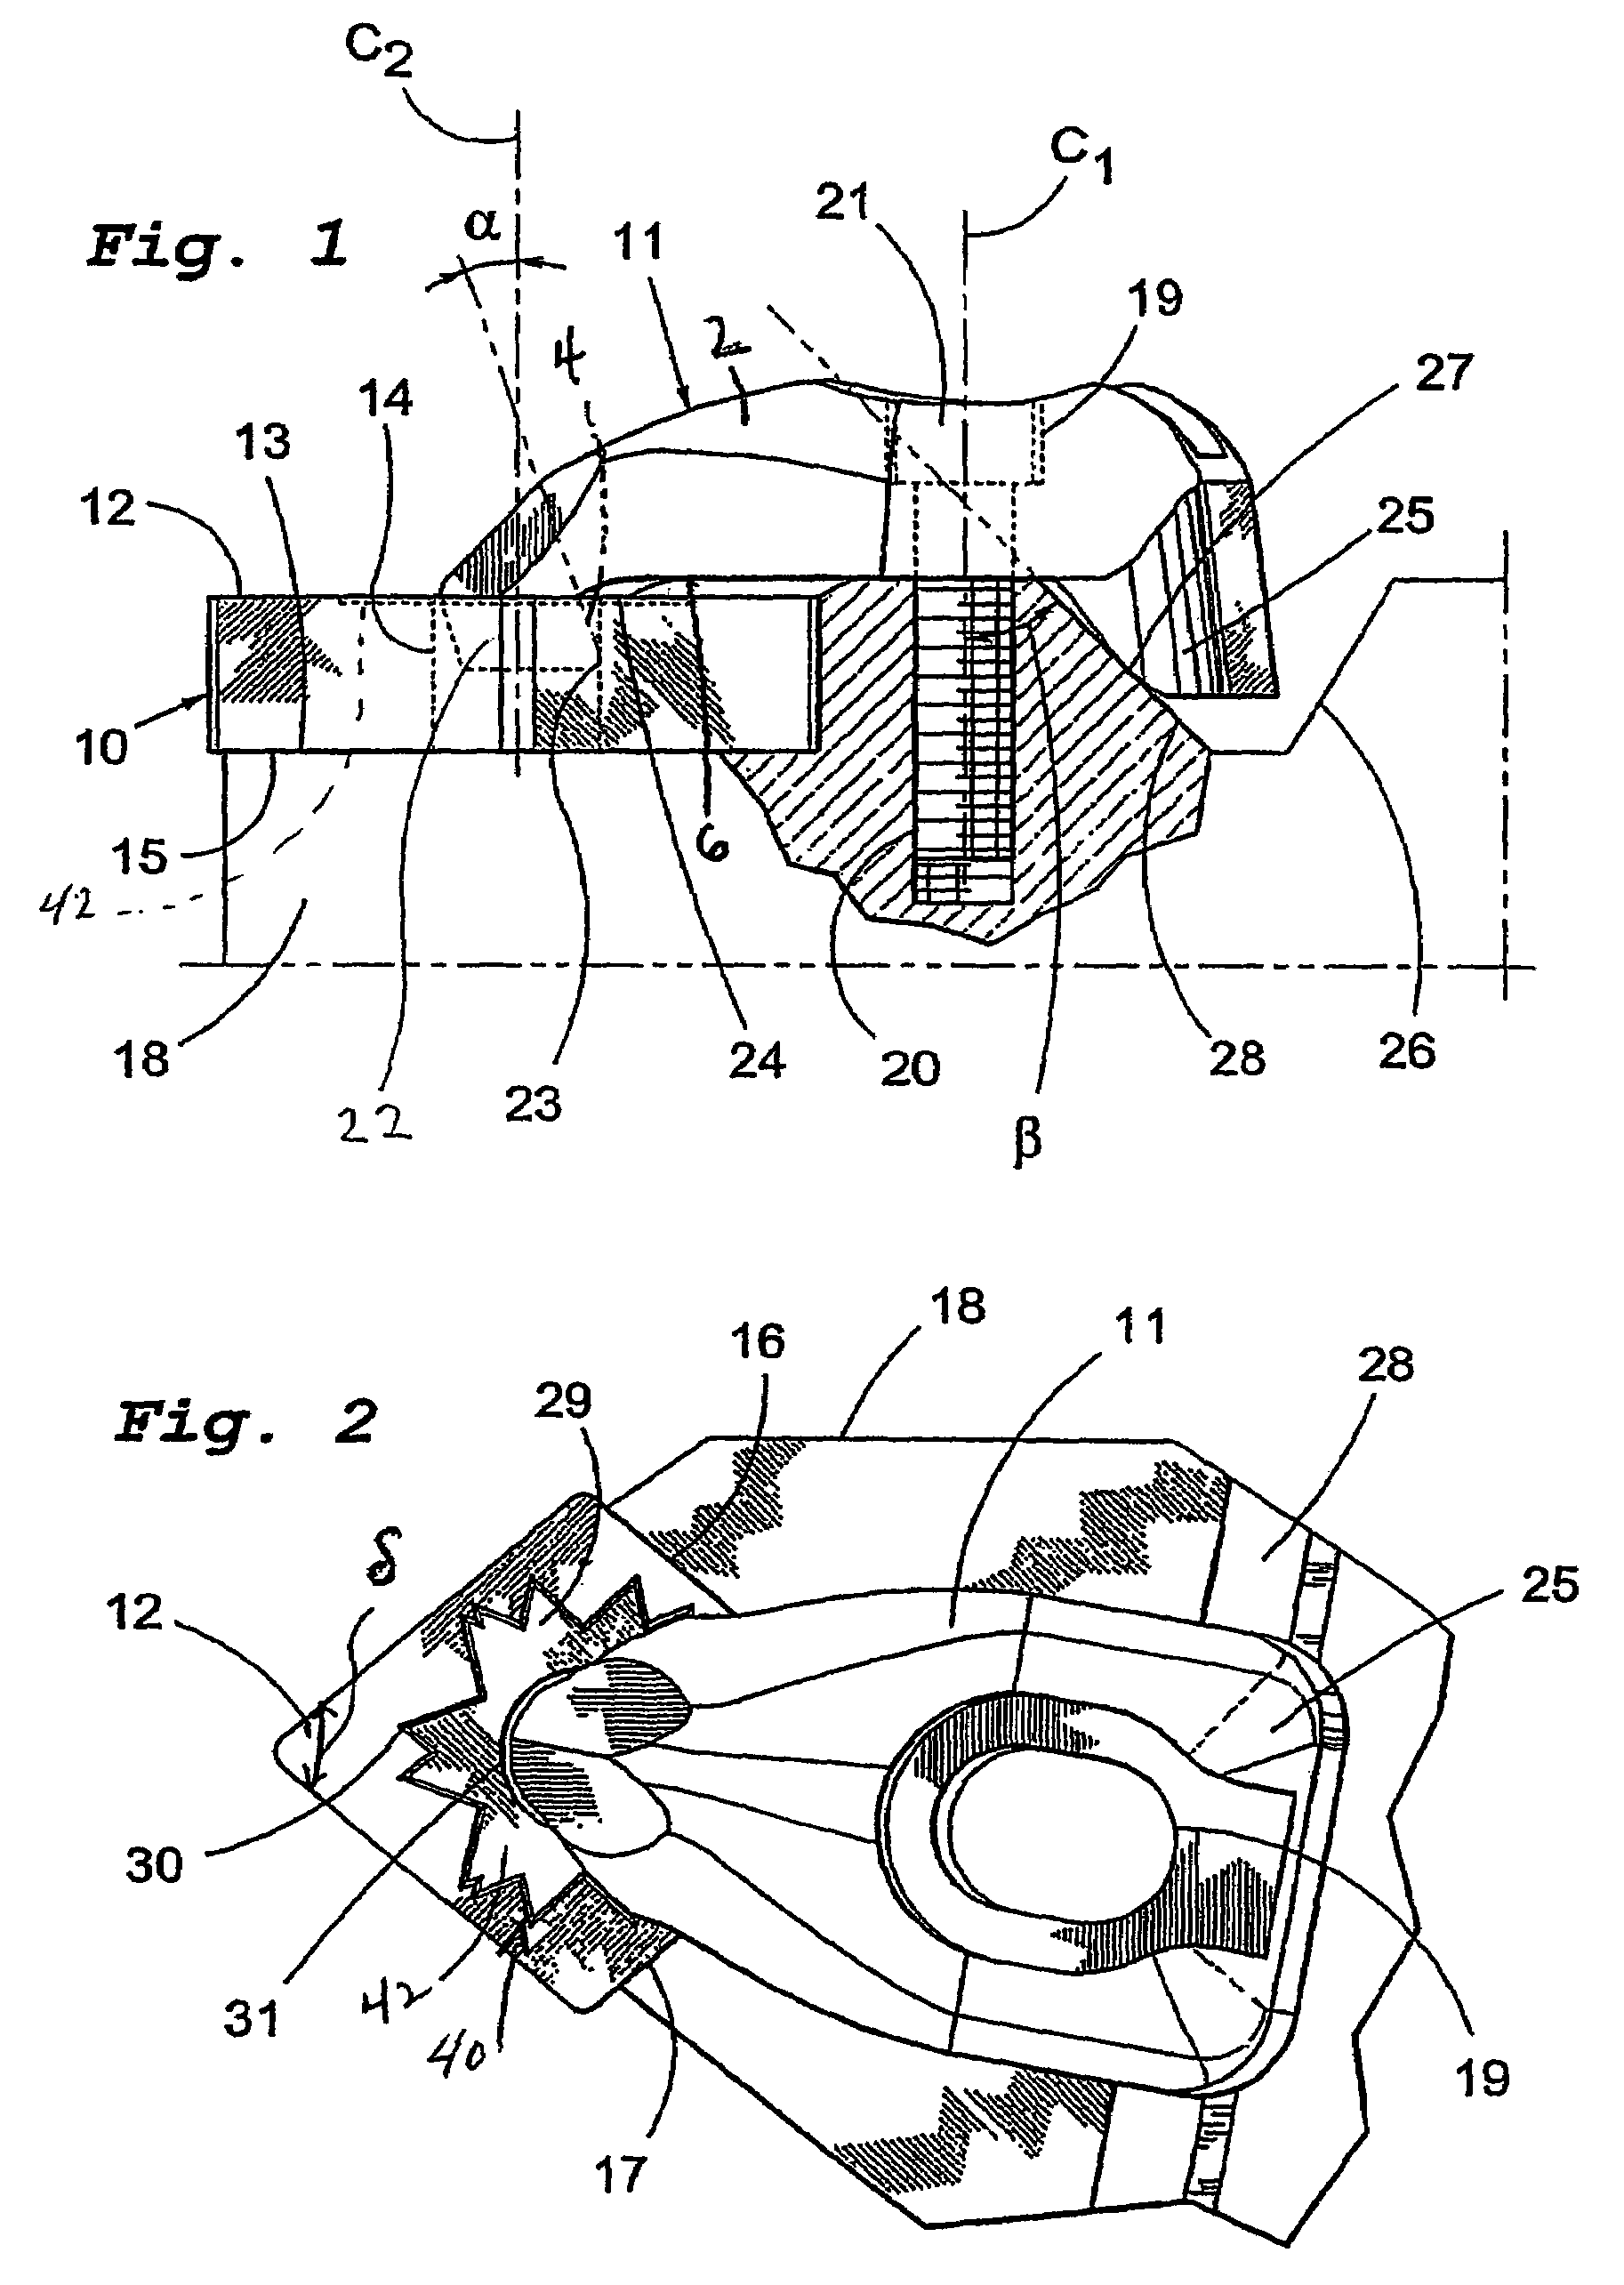 Cutting insert with an array of surfaces receiving clamping forces